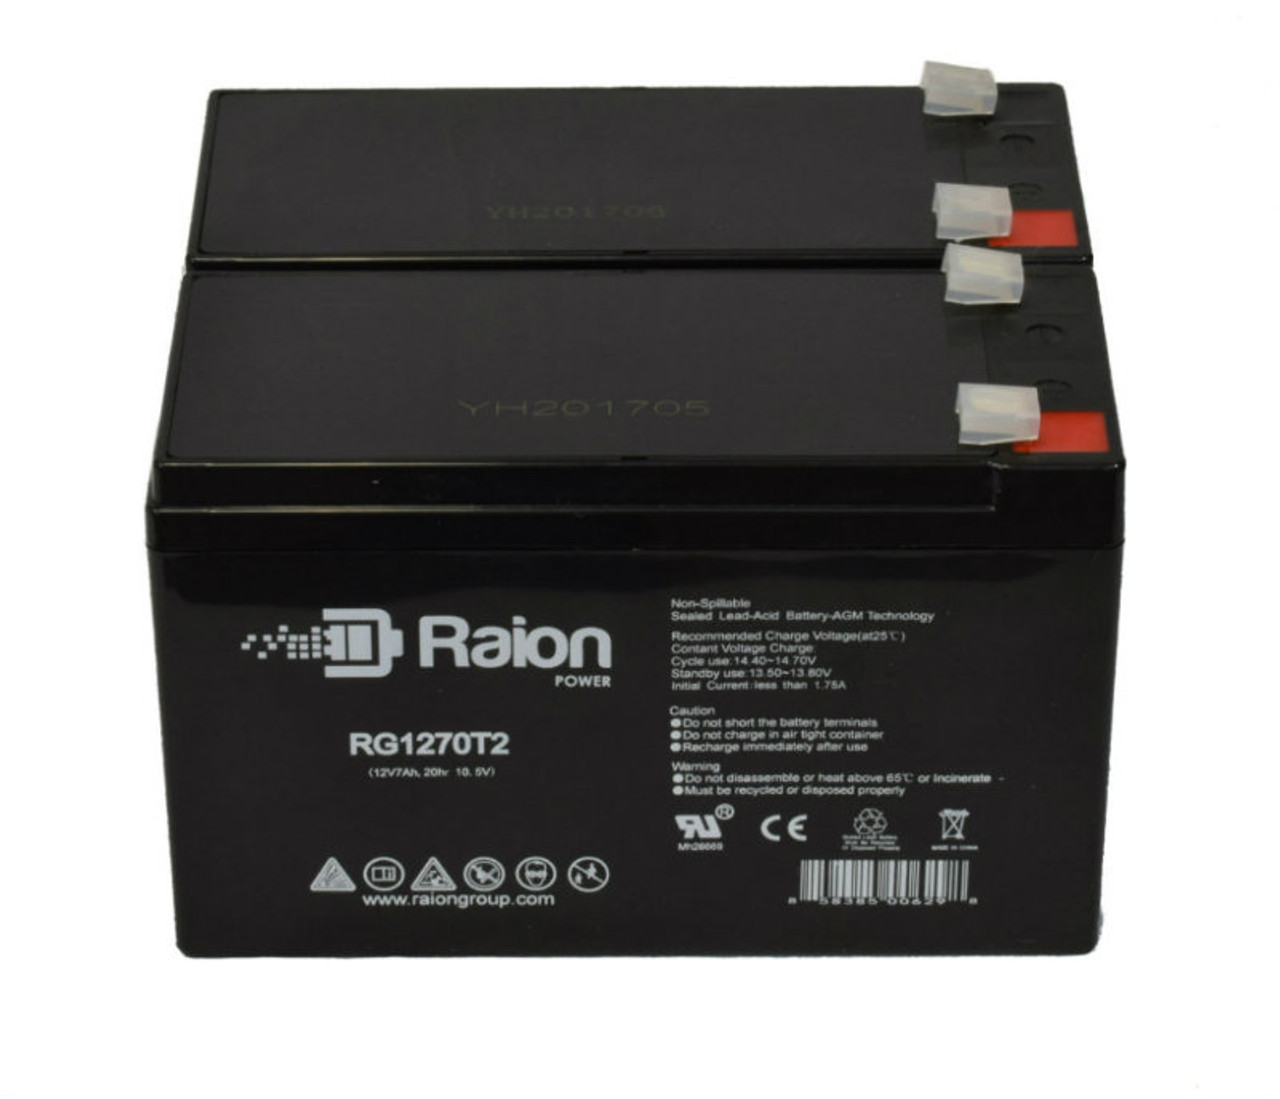 Raion Power Replacement 12V 7Ah Battery for Black Box BAT/BBB7.2 F1 - 2 Pack